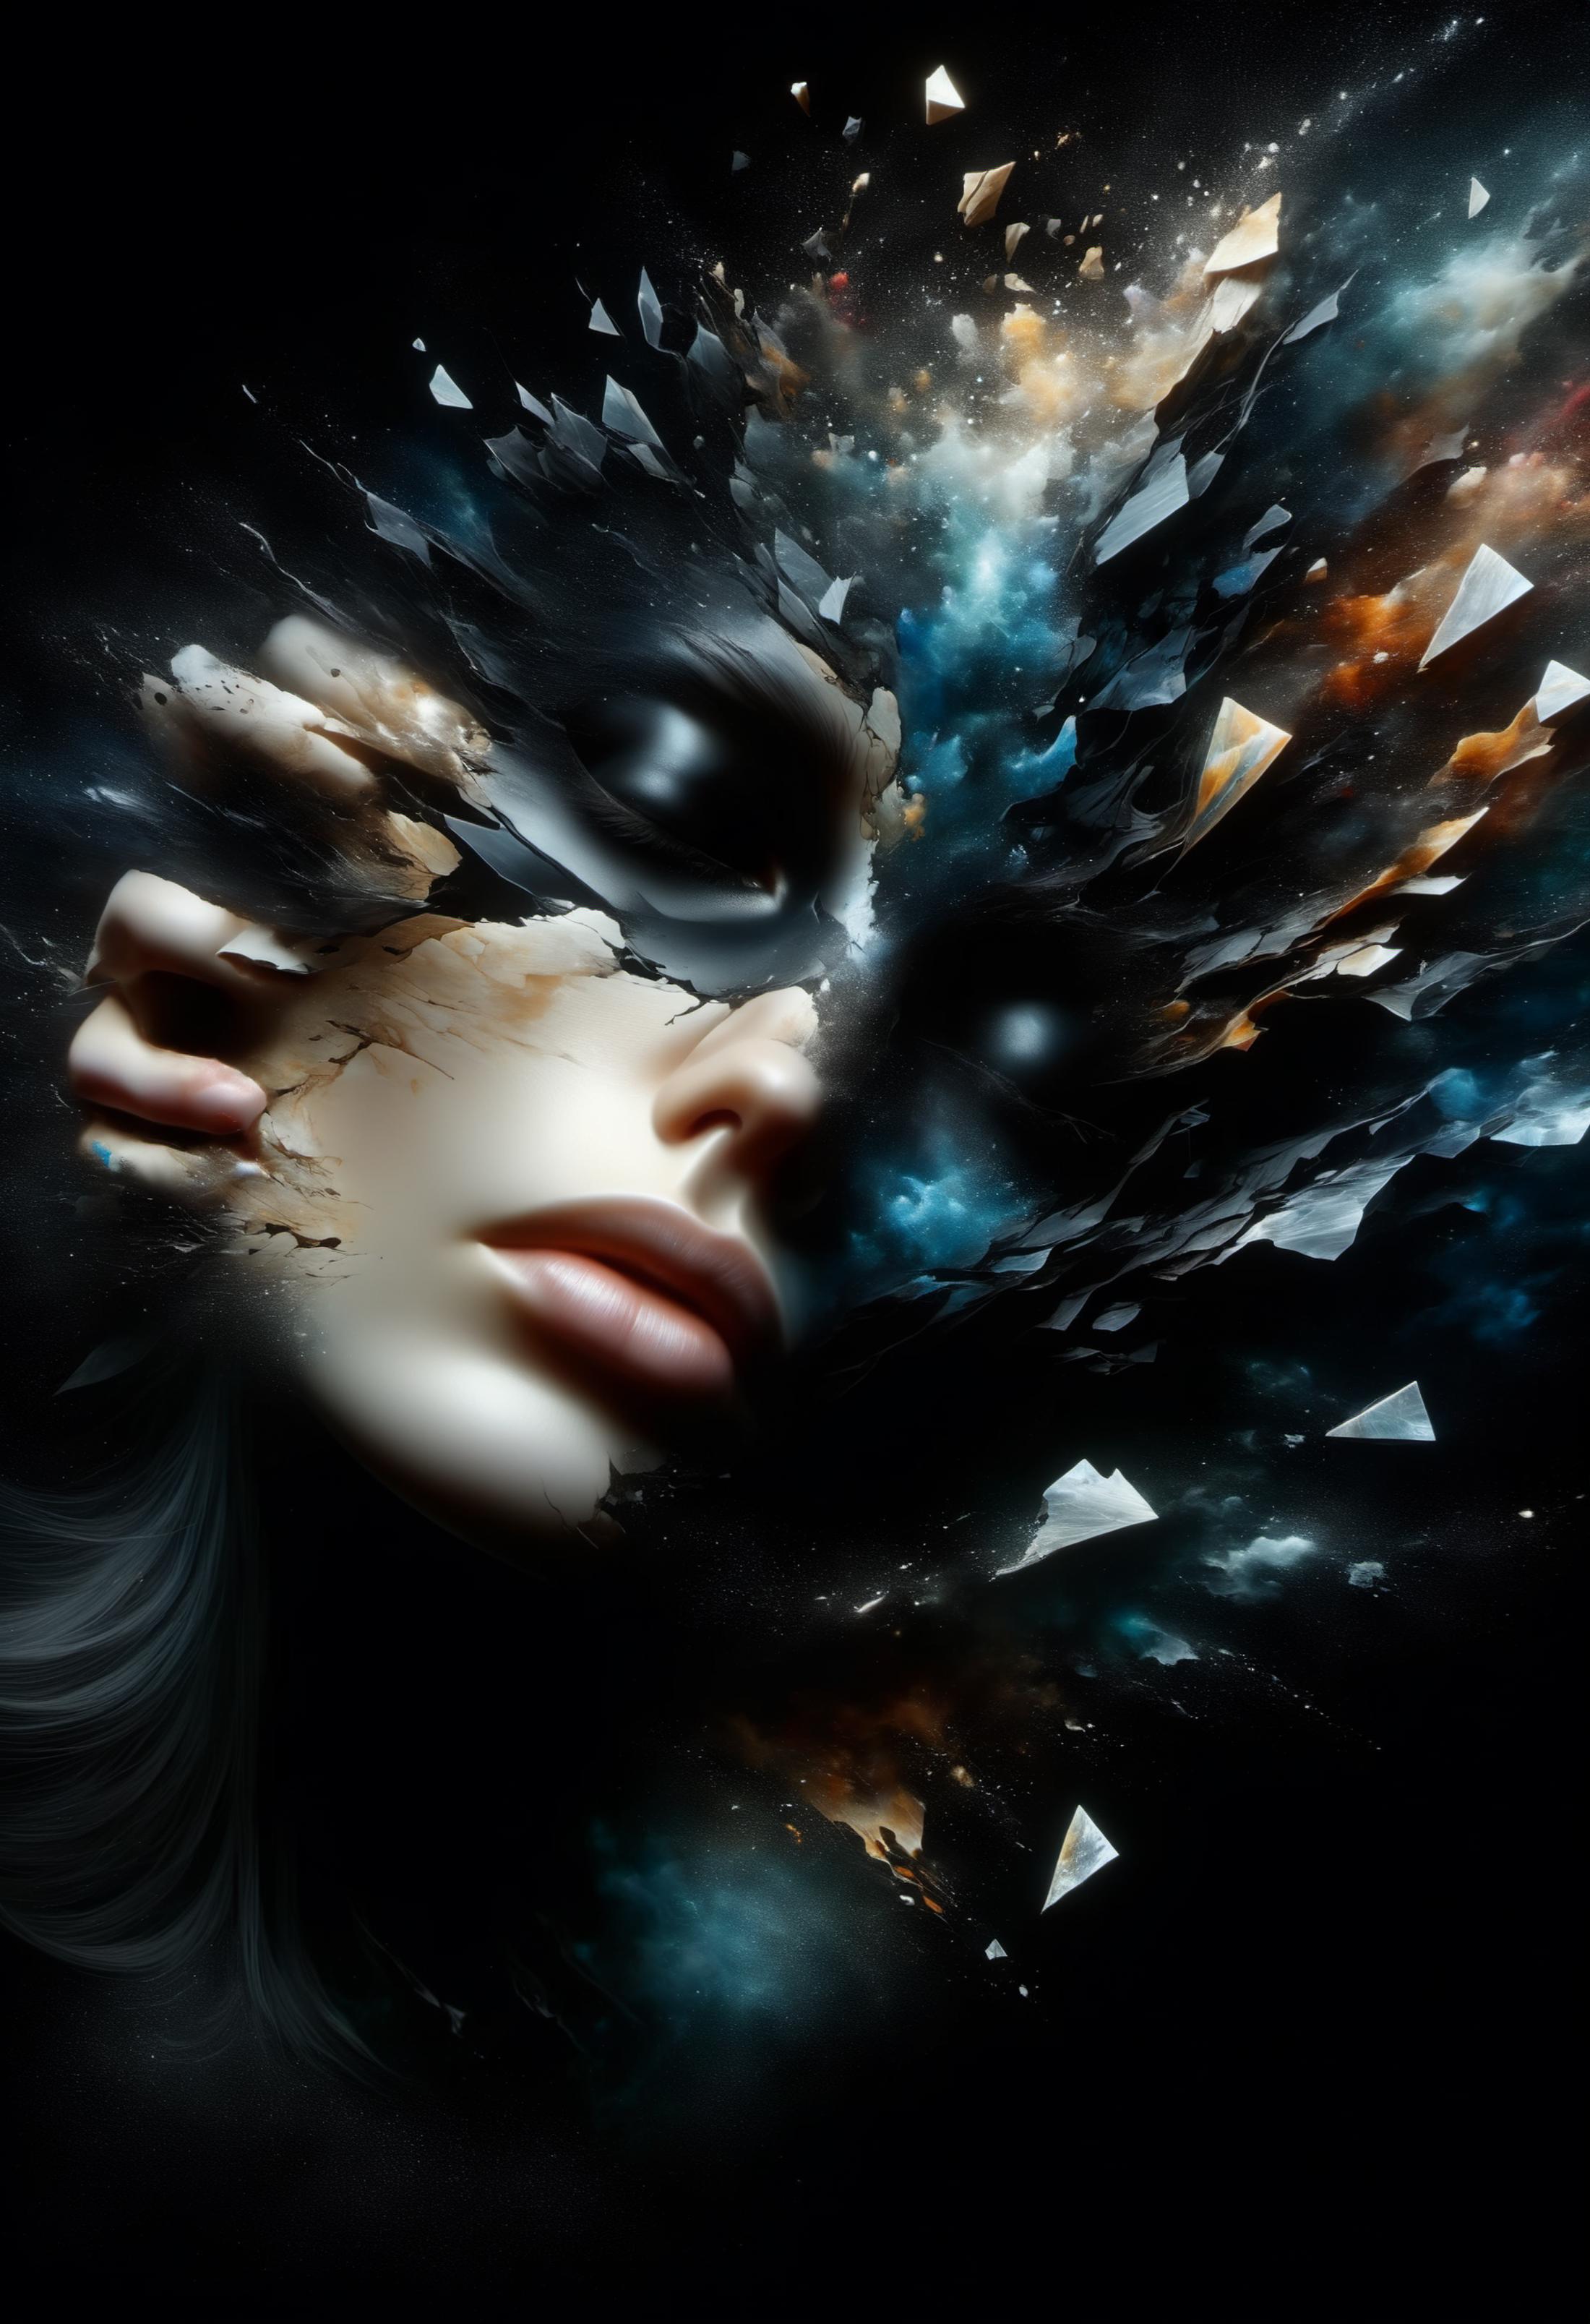 A woman's face created with shattered glass shards in a dark background.